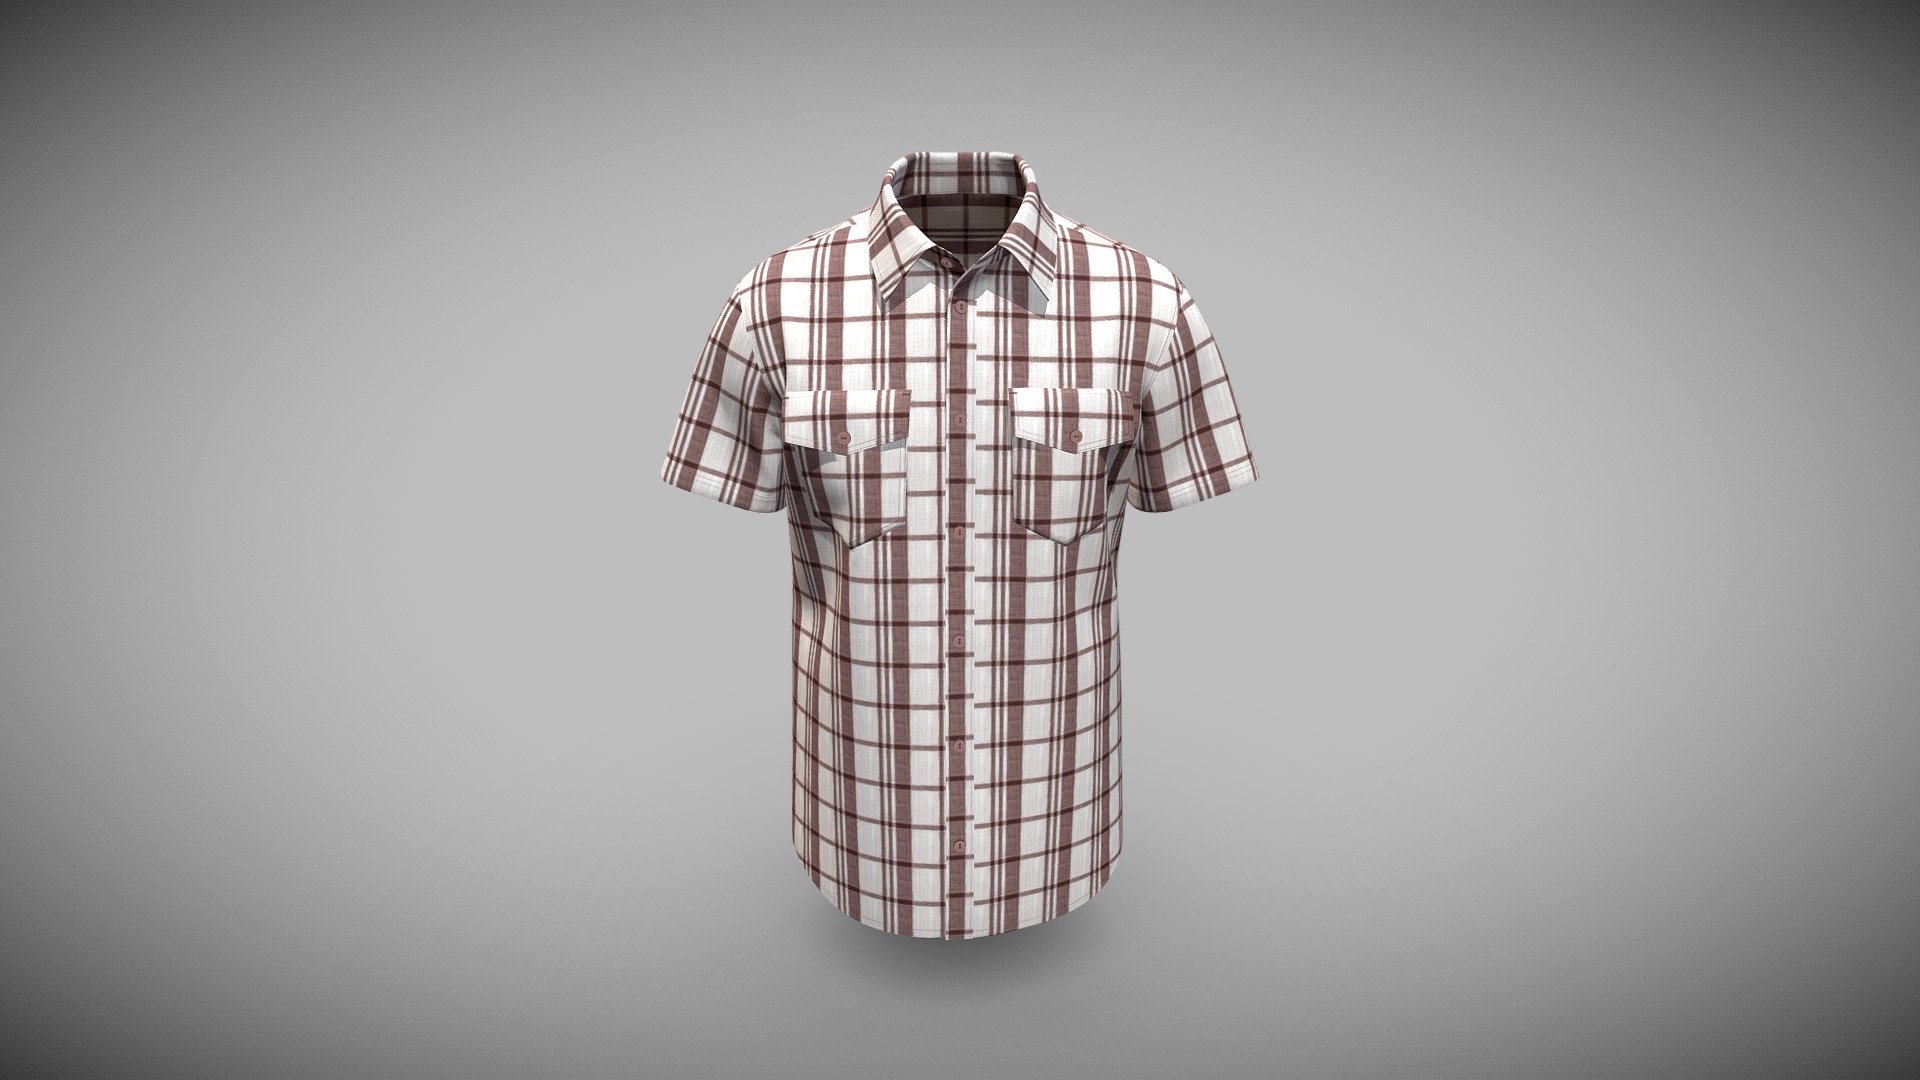 Cloth Title = Men's Short Sleeve Double Pocket Shirt 

SKU = DG100130 

Category = Unisex 

Product Type = Shirt 

Cloth Length = Regular 

Body Fit = Regular Fit 

Occasion = Beach 

Sleeve Style = Short Sleeve 


Our Services:

3D Apparel Design.

OBJ,FBX,GLTF Making with High/Low Poly.

Fabric Digitalization.

Mockup making.

3D Teck Pack.

Pattern Making.

2D Illustration.

Cloth Animation and 360 Spin Video.


Contact us:- 

Email: info@digitalfashionwear.com 

Website: https://digitalfashionwear.com 


We designed all the types of cloth specially focused on product visualization, e-commerce, fitting, and production. 

We will design: 

T-shirts 

Polo shirts 

Hoodies 

Sweatshirt 

Jackets 

Shirts 

TankTops 

Trousers 

Bras 

Underwear 

Blazer 

Aprons 

Leggings 

and All Fashion items. 





Our goal is to make sure what we provide you, meets your demand 3d model